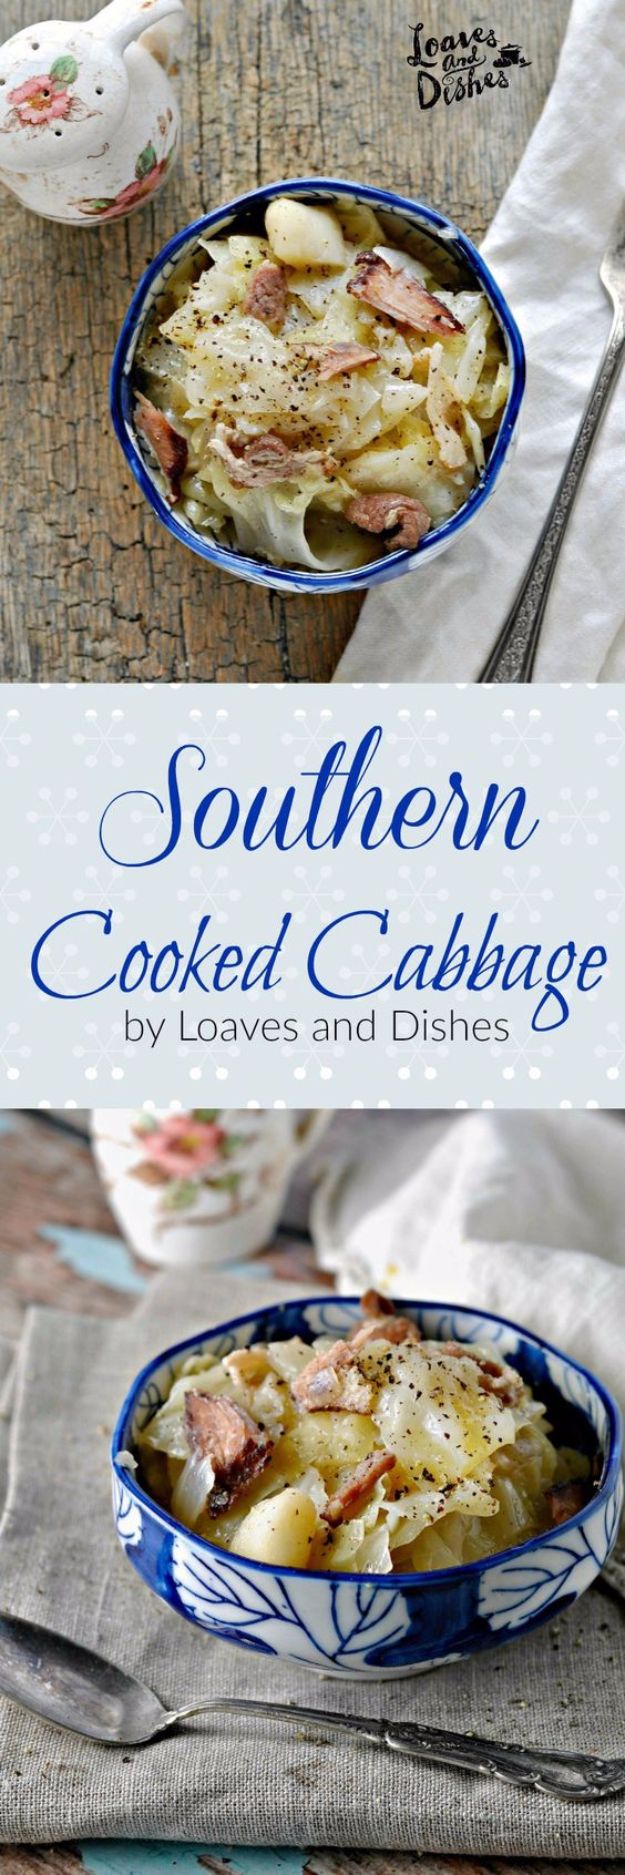 Best Country Cooking Recipes - Southern Cooked Cabbage - Easy Recipes for Country Food Like Chicken Fried Steak, Fried Green Tomatoes, Southern Gravy, Breads and Biscuits, Casseroles and More - Breakfast, Lunch and Dinner Recipe Ideas for Families and Feeding A Crowd - Step by Step Instructions for Making Homestyle Dips, Snacks, Desserts #recipes